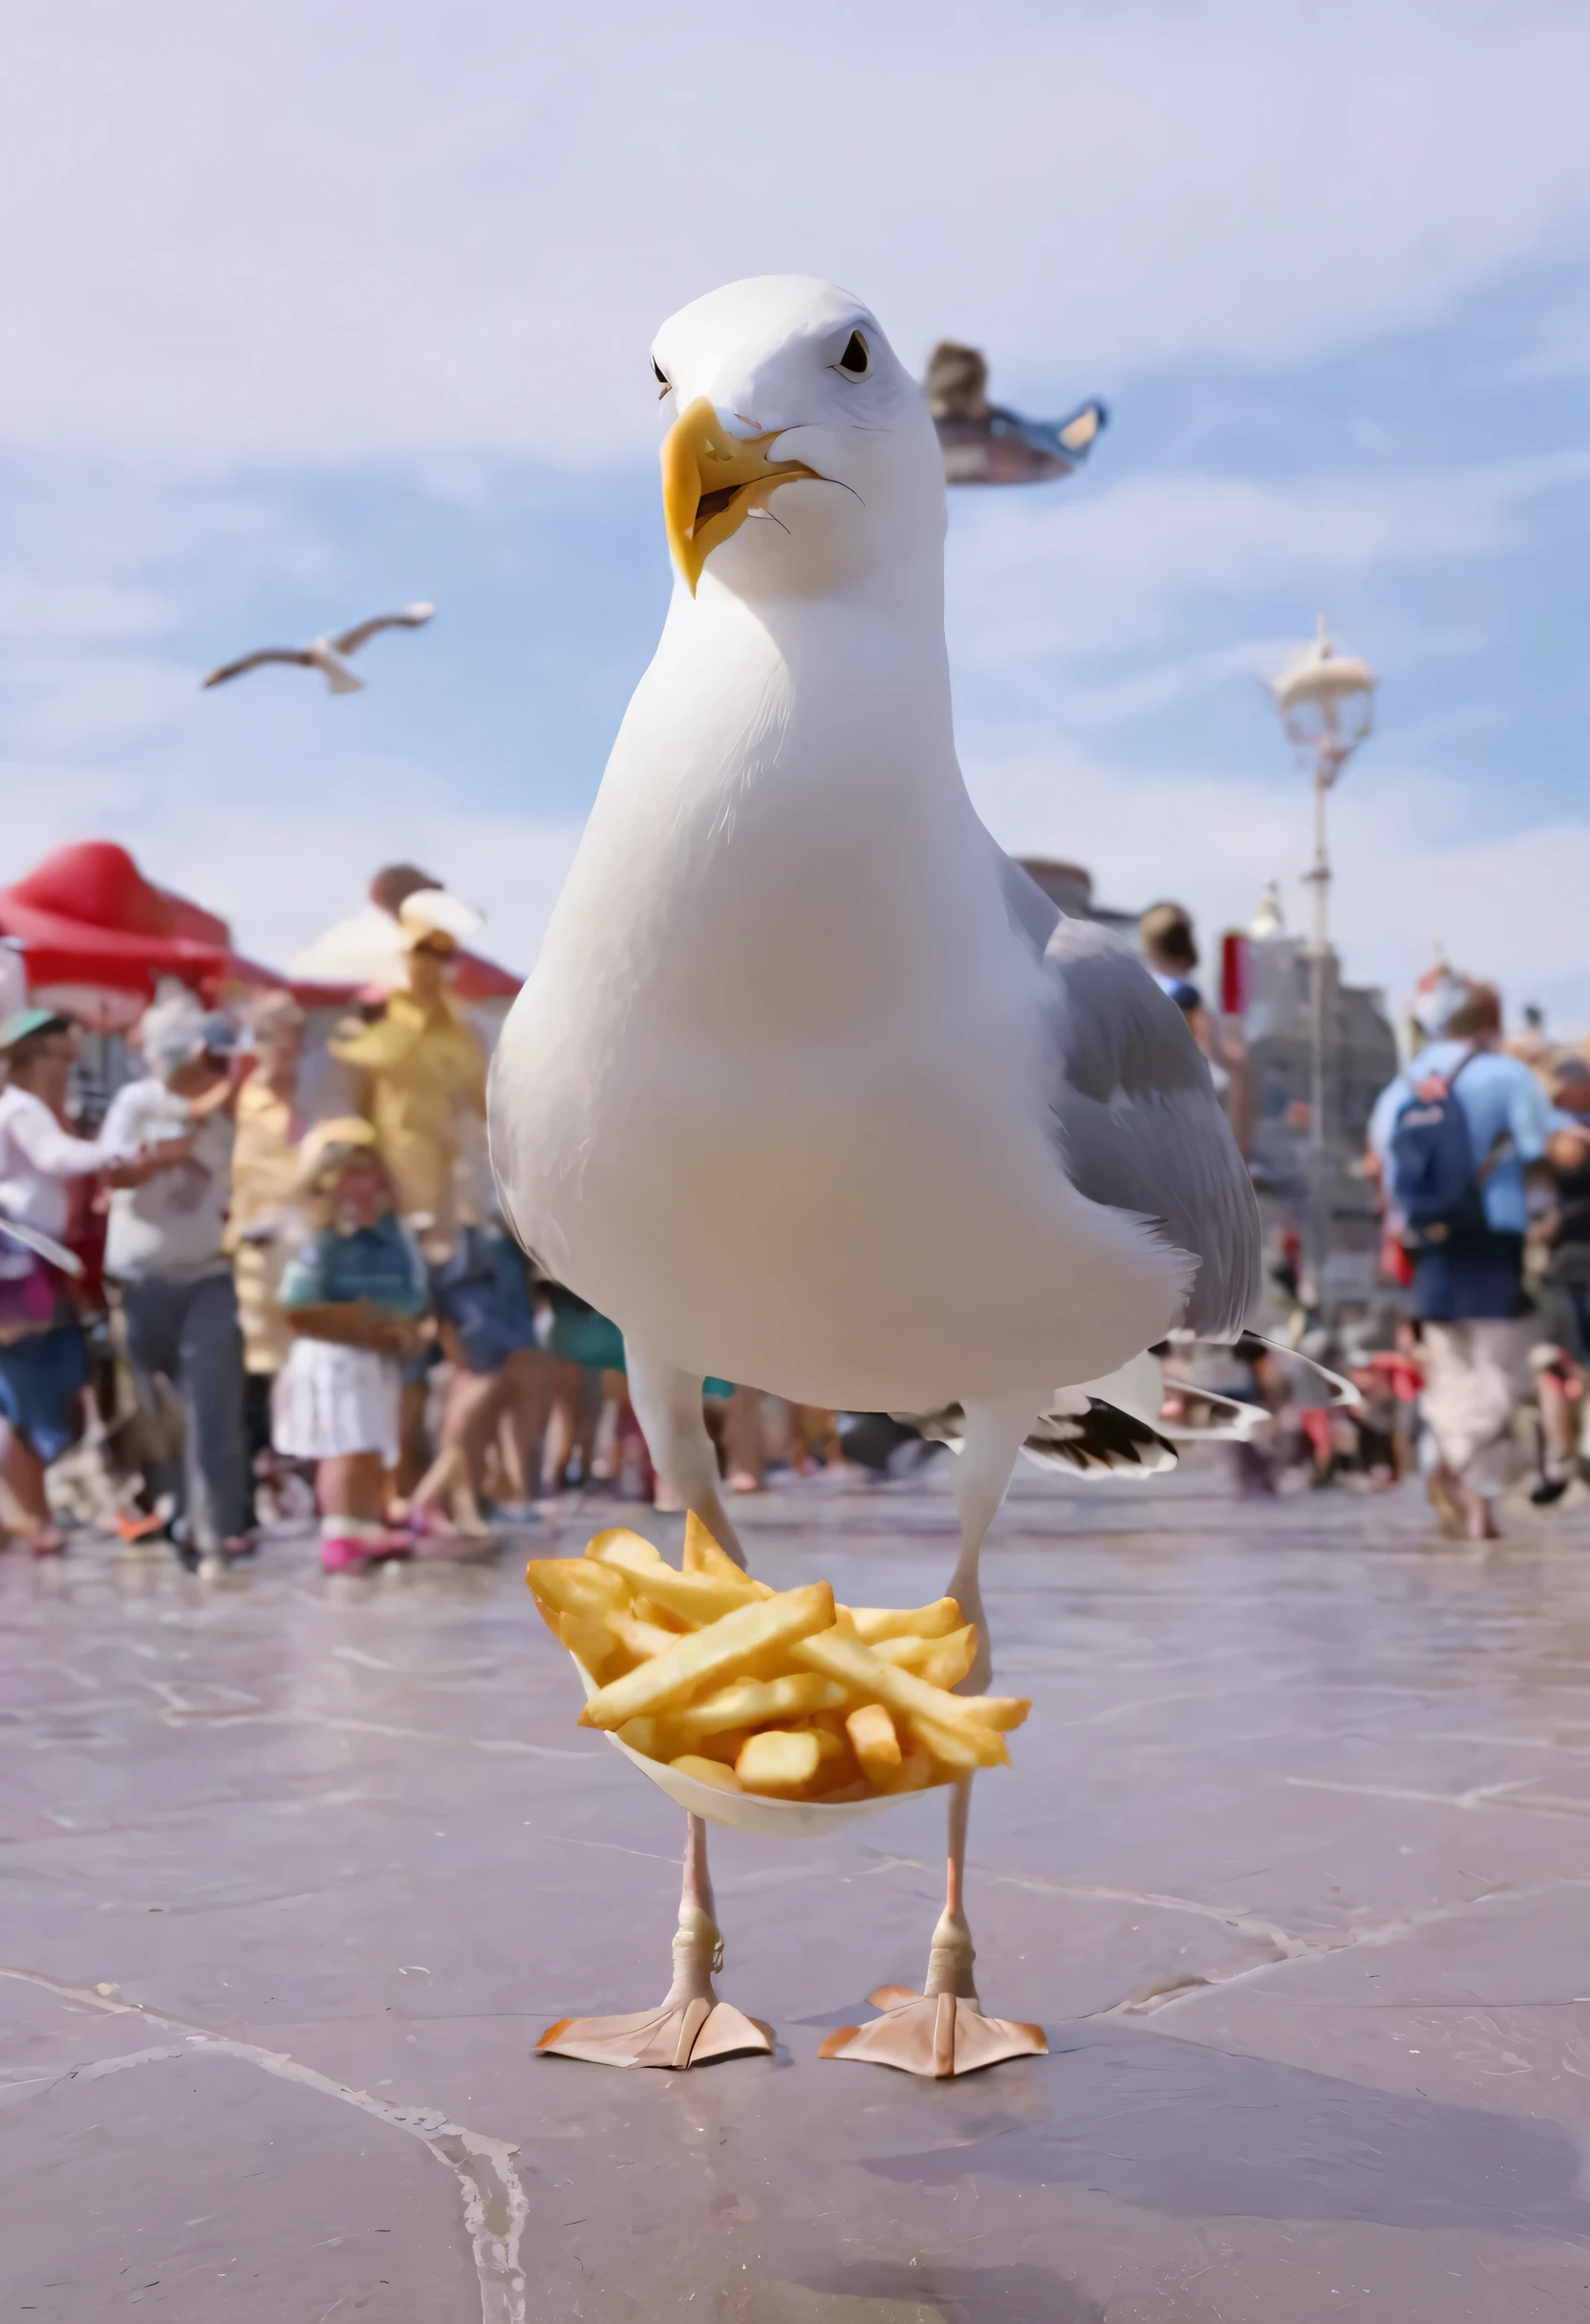 pale skin, blue eyes, man in seagull mascot suit, beak for mouth, no mouth, text "Fluffy Flying Fry Friends." Seagull, bird, (French fries)